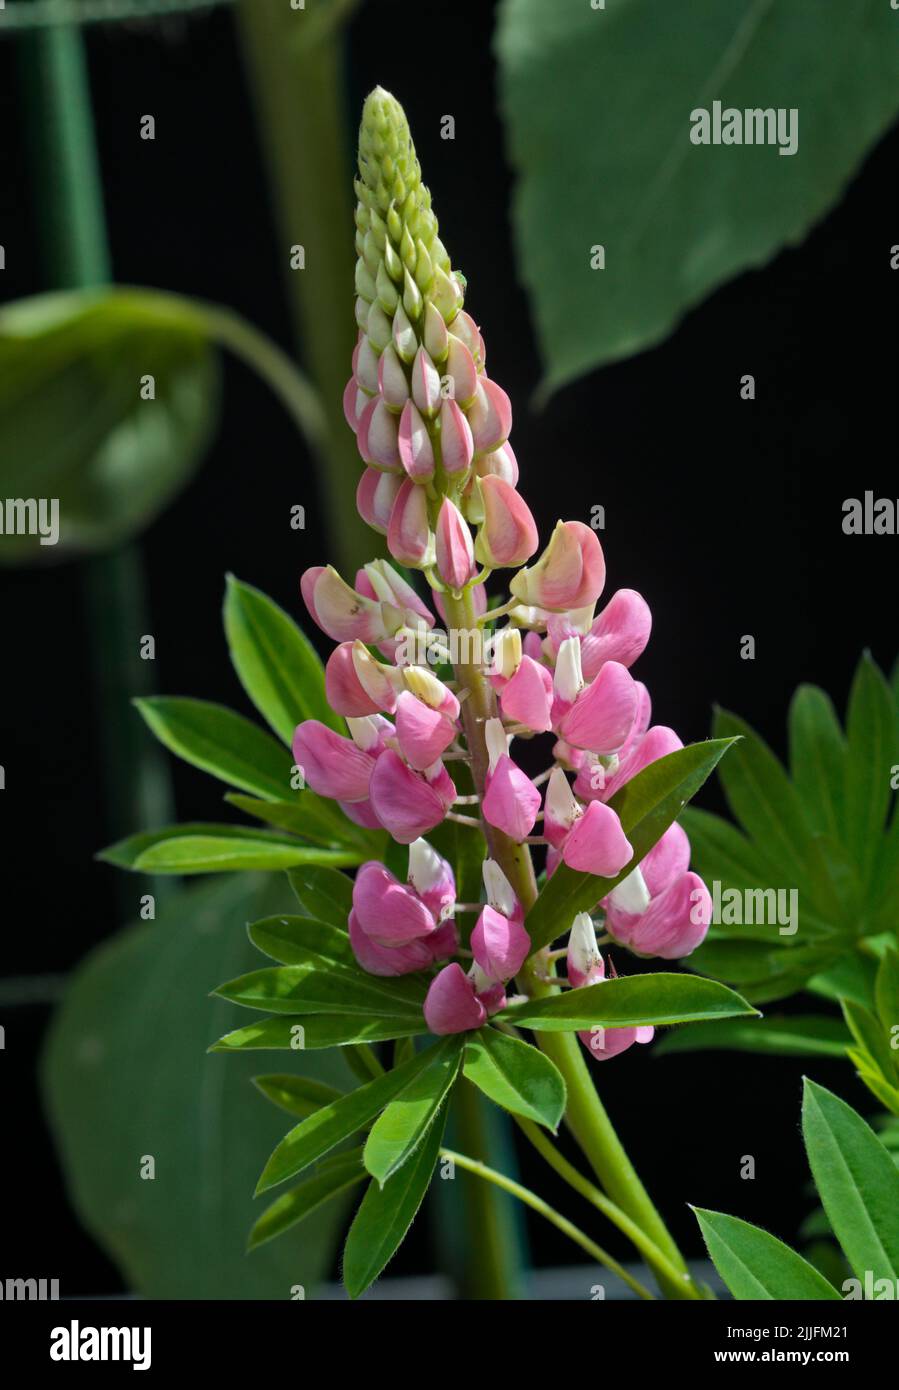 Lupins roses Banque D'Images